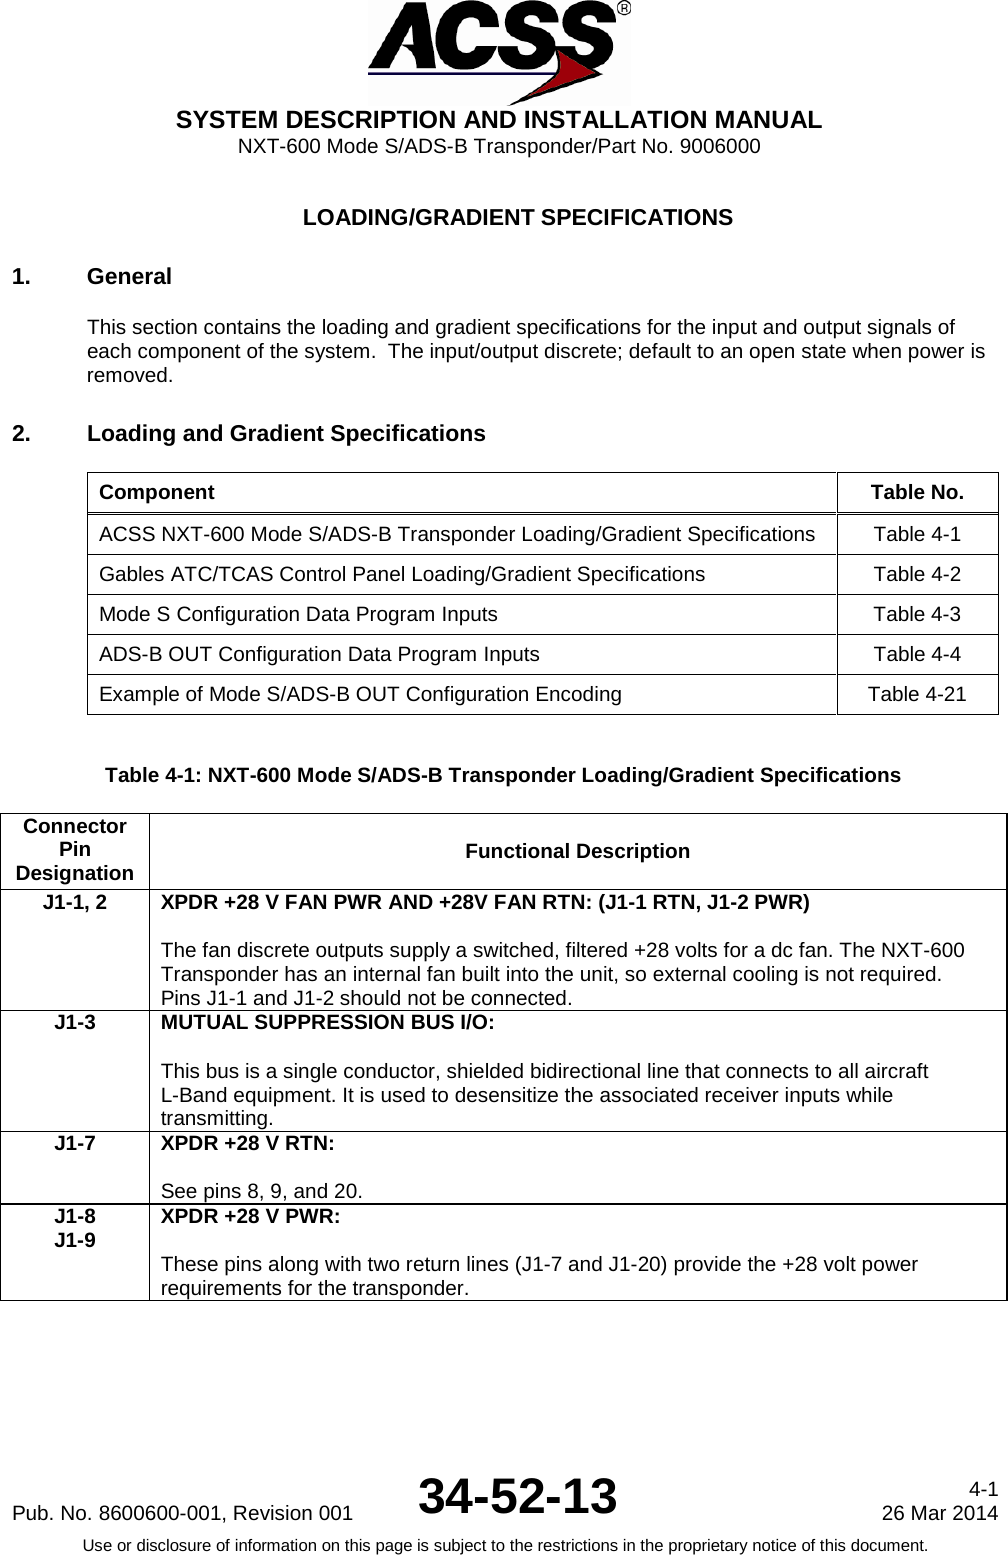  SYSTEM DESCRIPTION AND INSTALLATION MANUAL NXT-600 Mode S/ADS-B Transponder/Part No. 9006000  LOADING/GRADIENT SPECIFICATIONS 1. General This section contains the loading and gradient specifications for the input and output signals of each component of the system.  The input/output discrete; default to an open state when power is removed. 2. Loading and Gradient Specifications Component Table No. ACSS NXT-600 Mode S/ADS-B Transponder Loading/Gradient Specifications Table 4-1 Gables ATC/TCAS Control Panel Loading/Gradient Specifications Table 4-2 Mode S Configuration Data Program Inputs Table 4-3 ADS-B OUT Configuration Data Program Inputs Table 4-4 Example of Mode S/ADS-B OUT Configuration Encoding Table 4-21  Table 4-1: NXT-600 Mode S/ADS-B Transponder Loading/Gradient Specifications Connector Pin Designation Functional Description J1-1, 2 XPDR +28 V FAN PWR AND +28V FAN RTN: (J1-1 RTN, J1-2 PWR)  The fan discrete outputs supply a switched, filtered +28 volts for a dc fan. The NXT-600 Transponder has an internal fan built into the unit, so external cooling is not required. Pins J1-1 and J1-2 should not be connected. J1-3 MUTUAL SUPPRESSION BUS I/O:  This bus is a single conductor, shielded bidirectional line that connects to all aircraft L-Band equipment. It is used to desensitize the associated receiver inputs while transmitting. J1-7 XPDR +28 V RTN:  See pins 8, 9, and 20. J1-8 J1-9 XPDR +28 V PWR:  These pins along with two return lines (J1-7 and J1-20) provide the +28 volt power requirements for the transponder.  Pub. No. 8600600-001, Revision 001 34-52-13 4-1 26 Mar 2014 Use or disclosure of information on this page is subject to the restrictions in the proprietary notice of this document.  